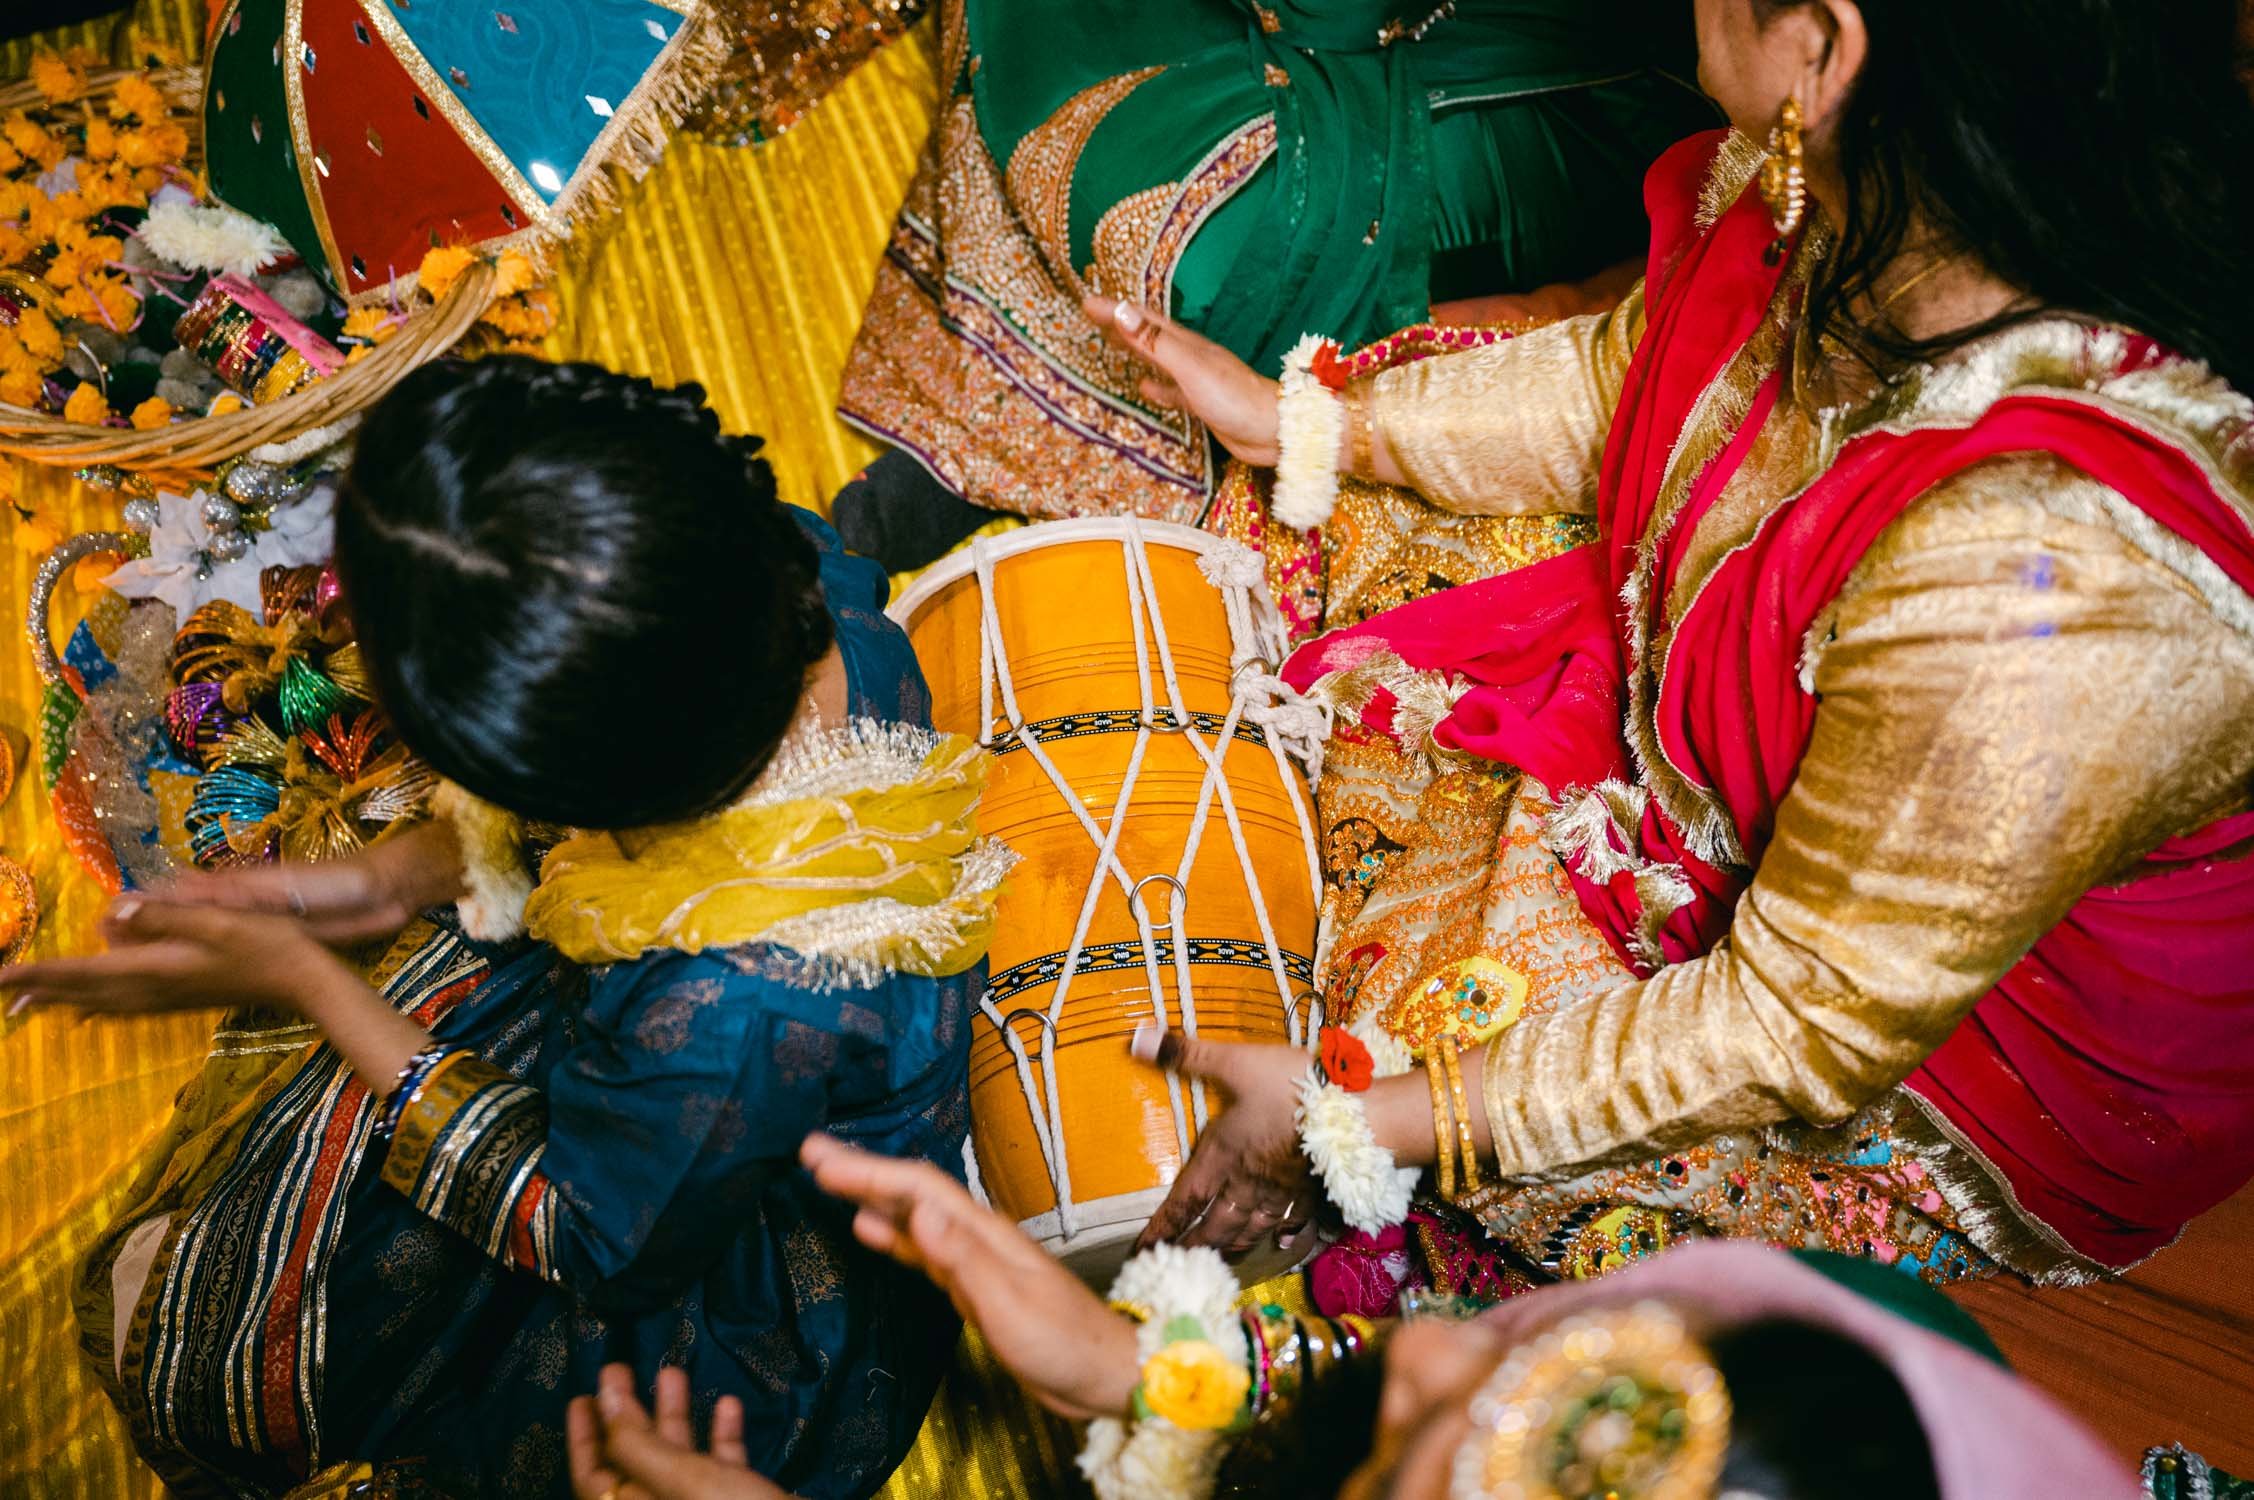 Mehendi party (Pakistani style), photo of drumming during the party